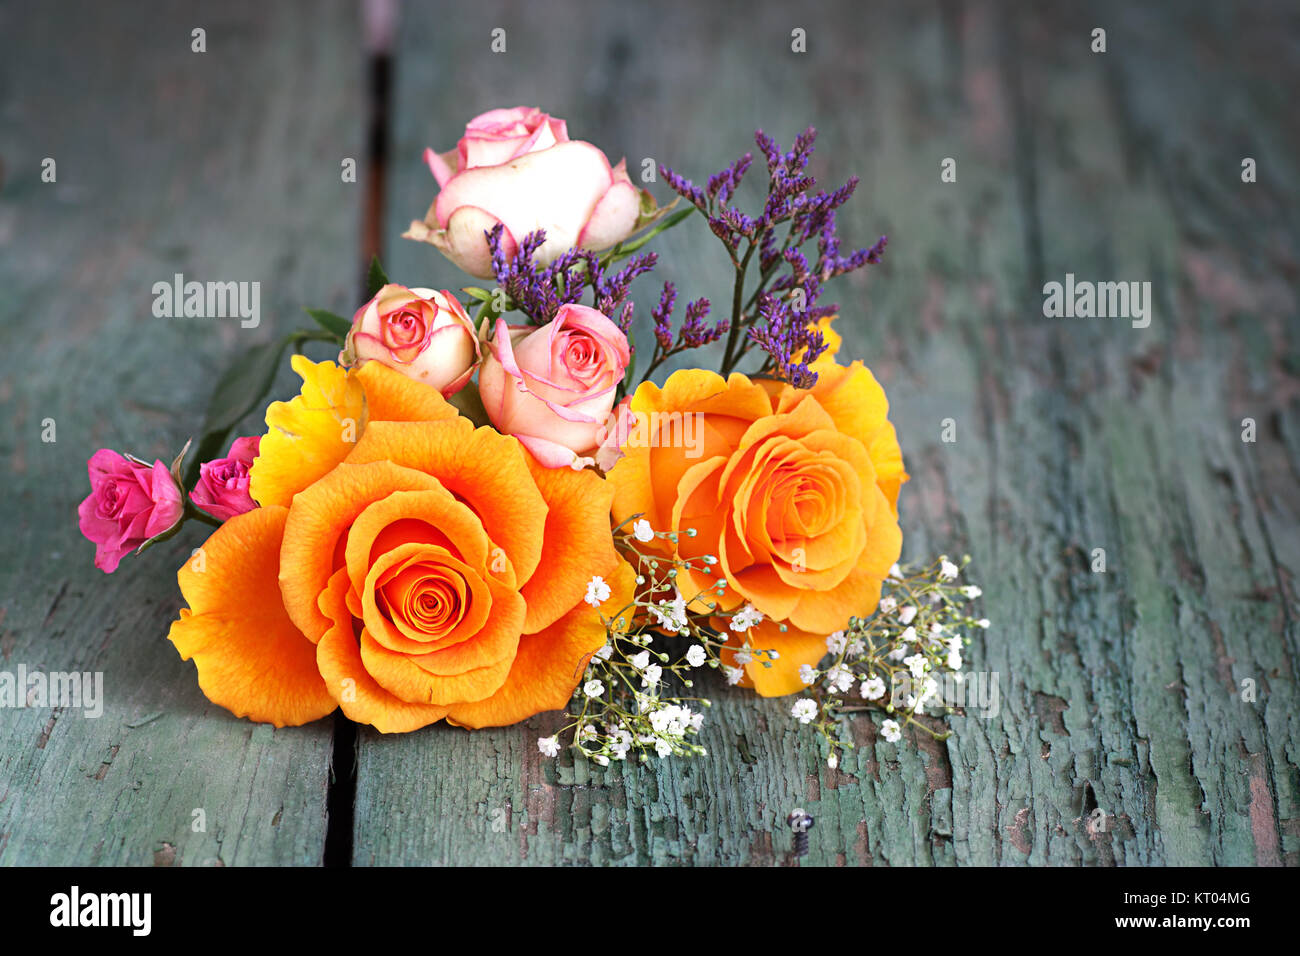 Colorful bouquet of roses on an old wooden table Stock Photo